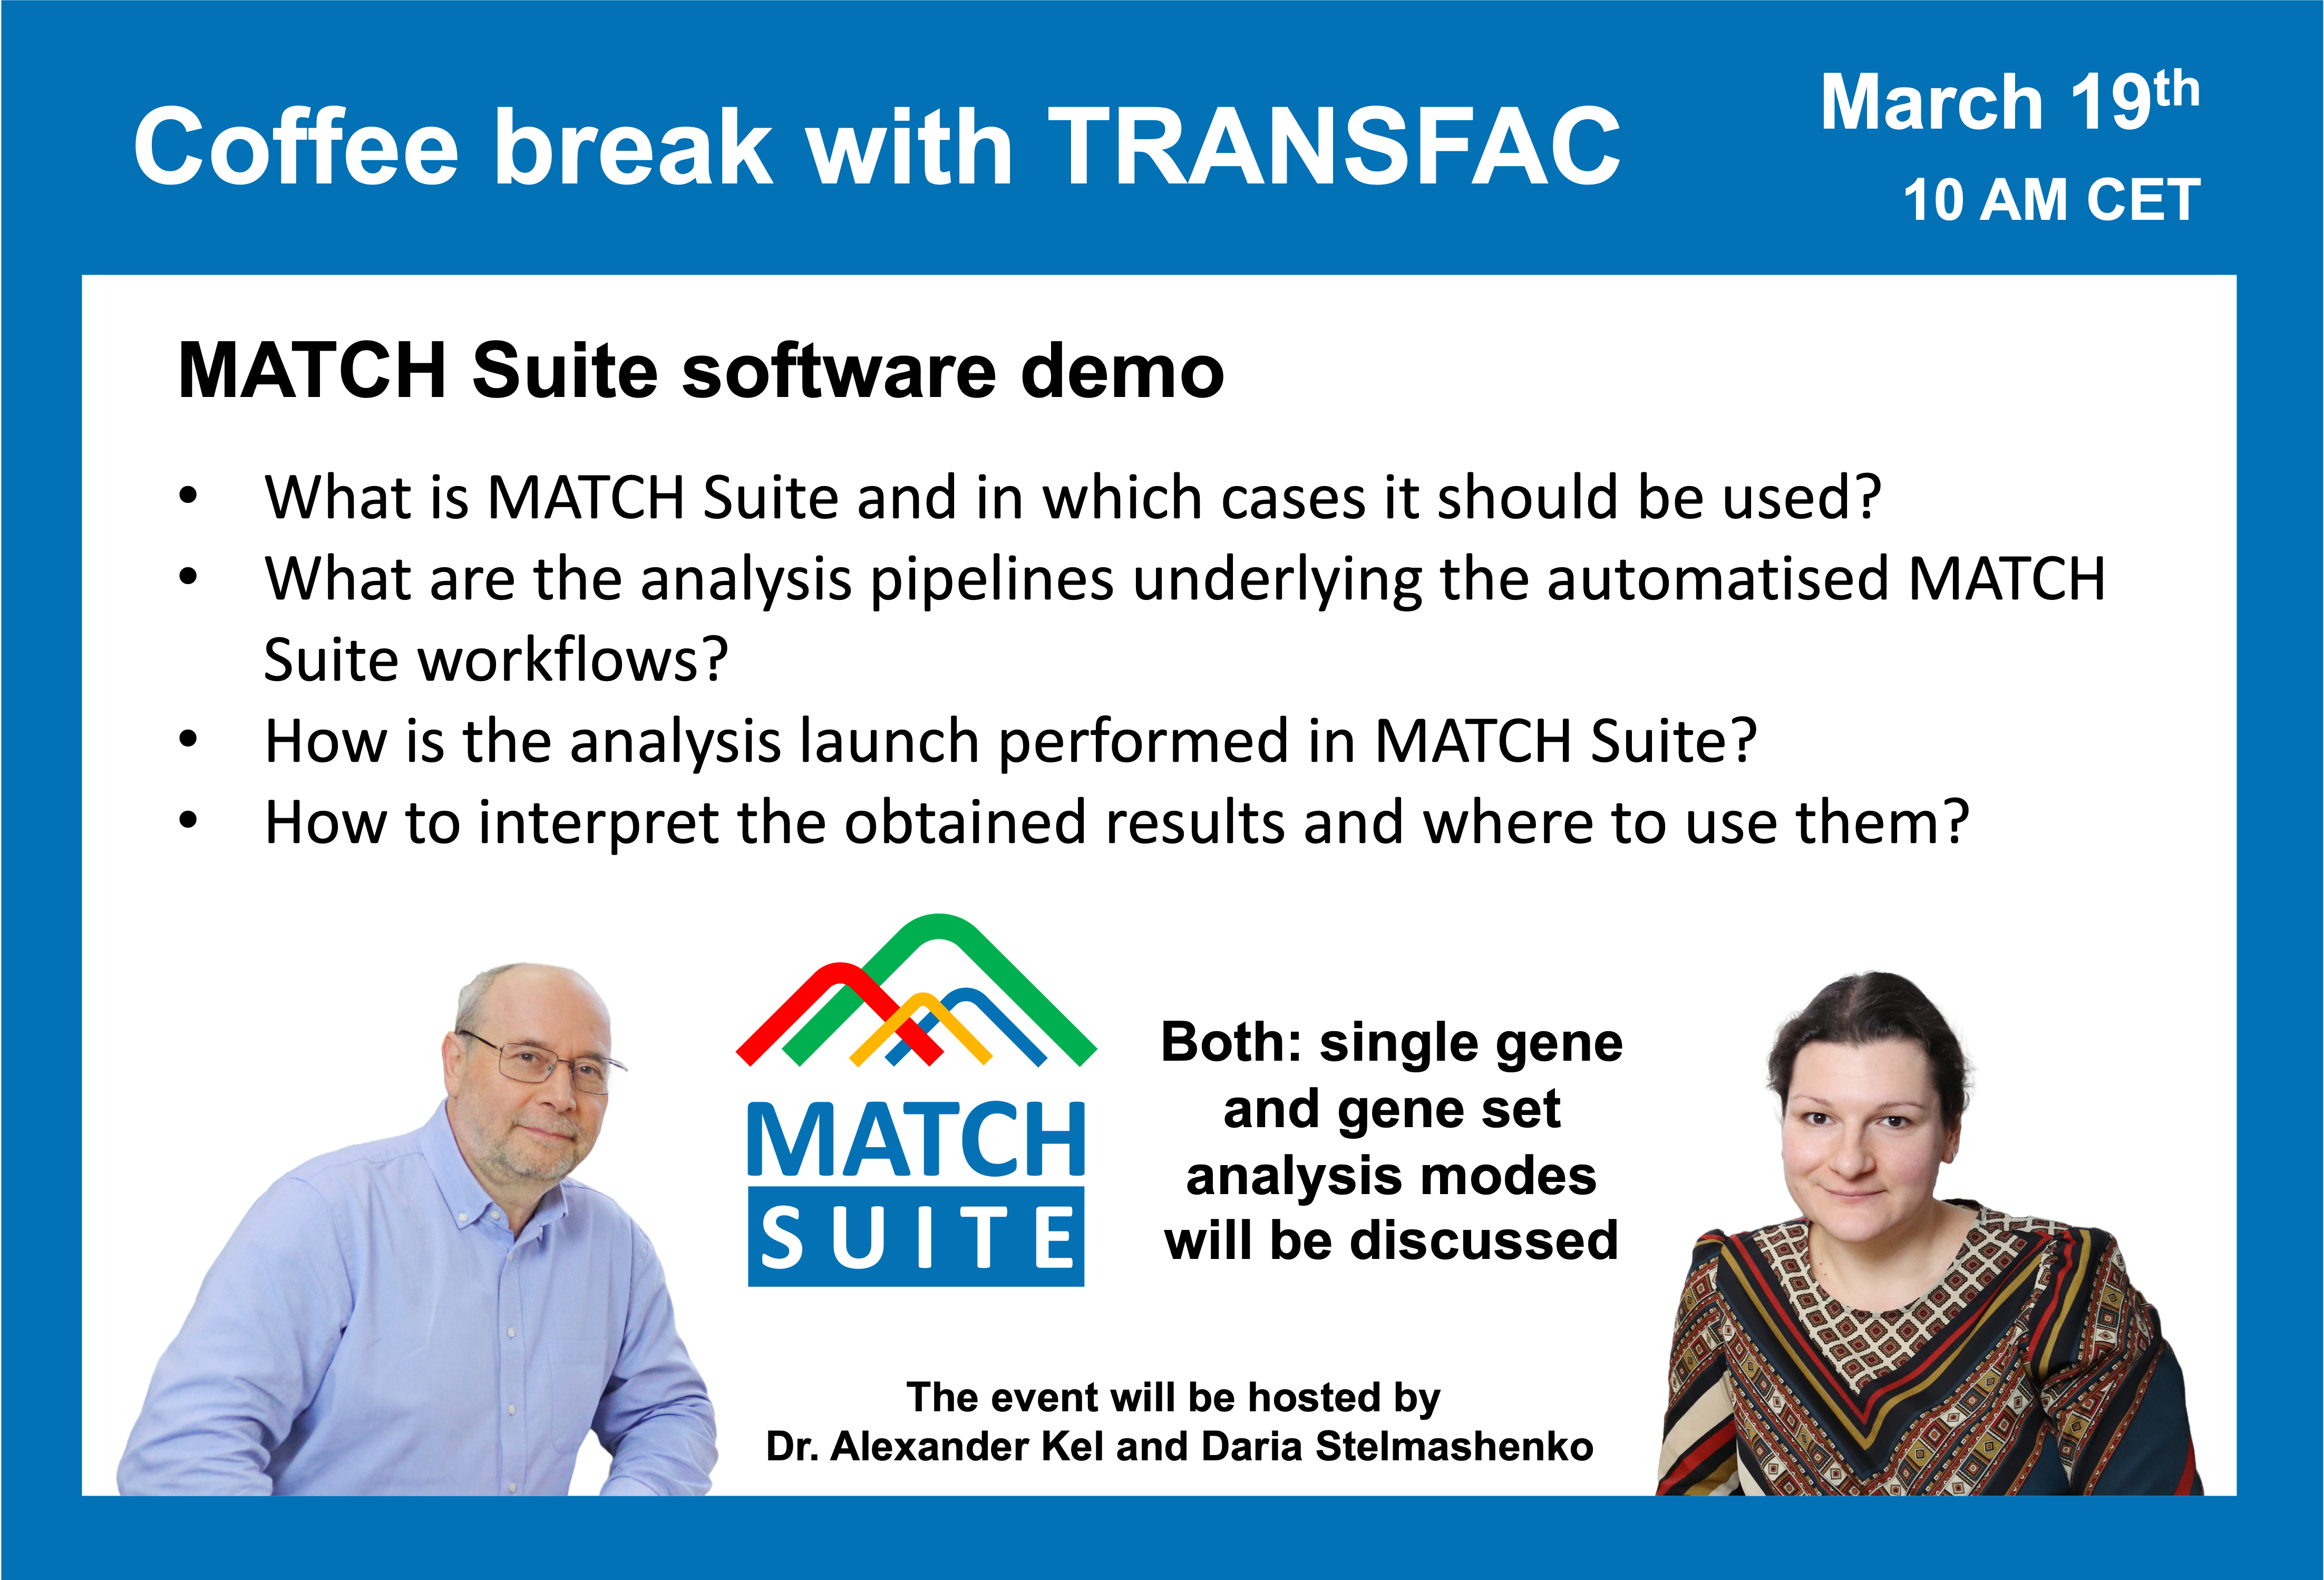 MATCH Suite software demo - cofee break with TRANSFAC